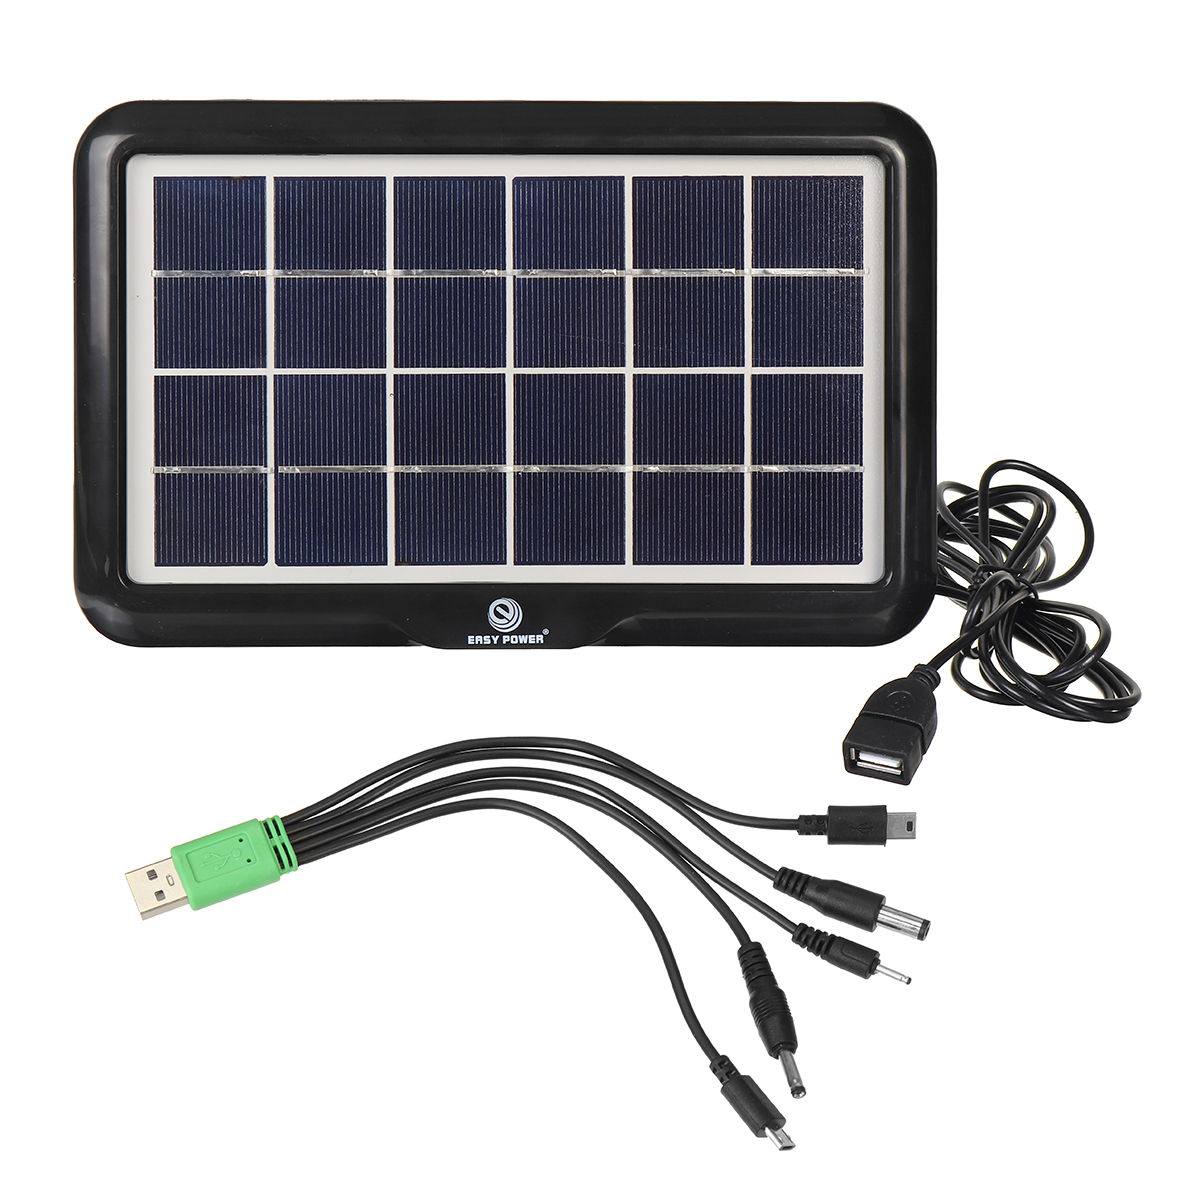 32W-Portable-Outdoor-Solar-Panel-Polycrystalline-Silicon-Solar-Panel-With-Interface-Mobile-Phone-Fan-1928784-4